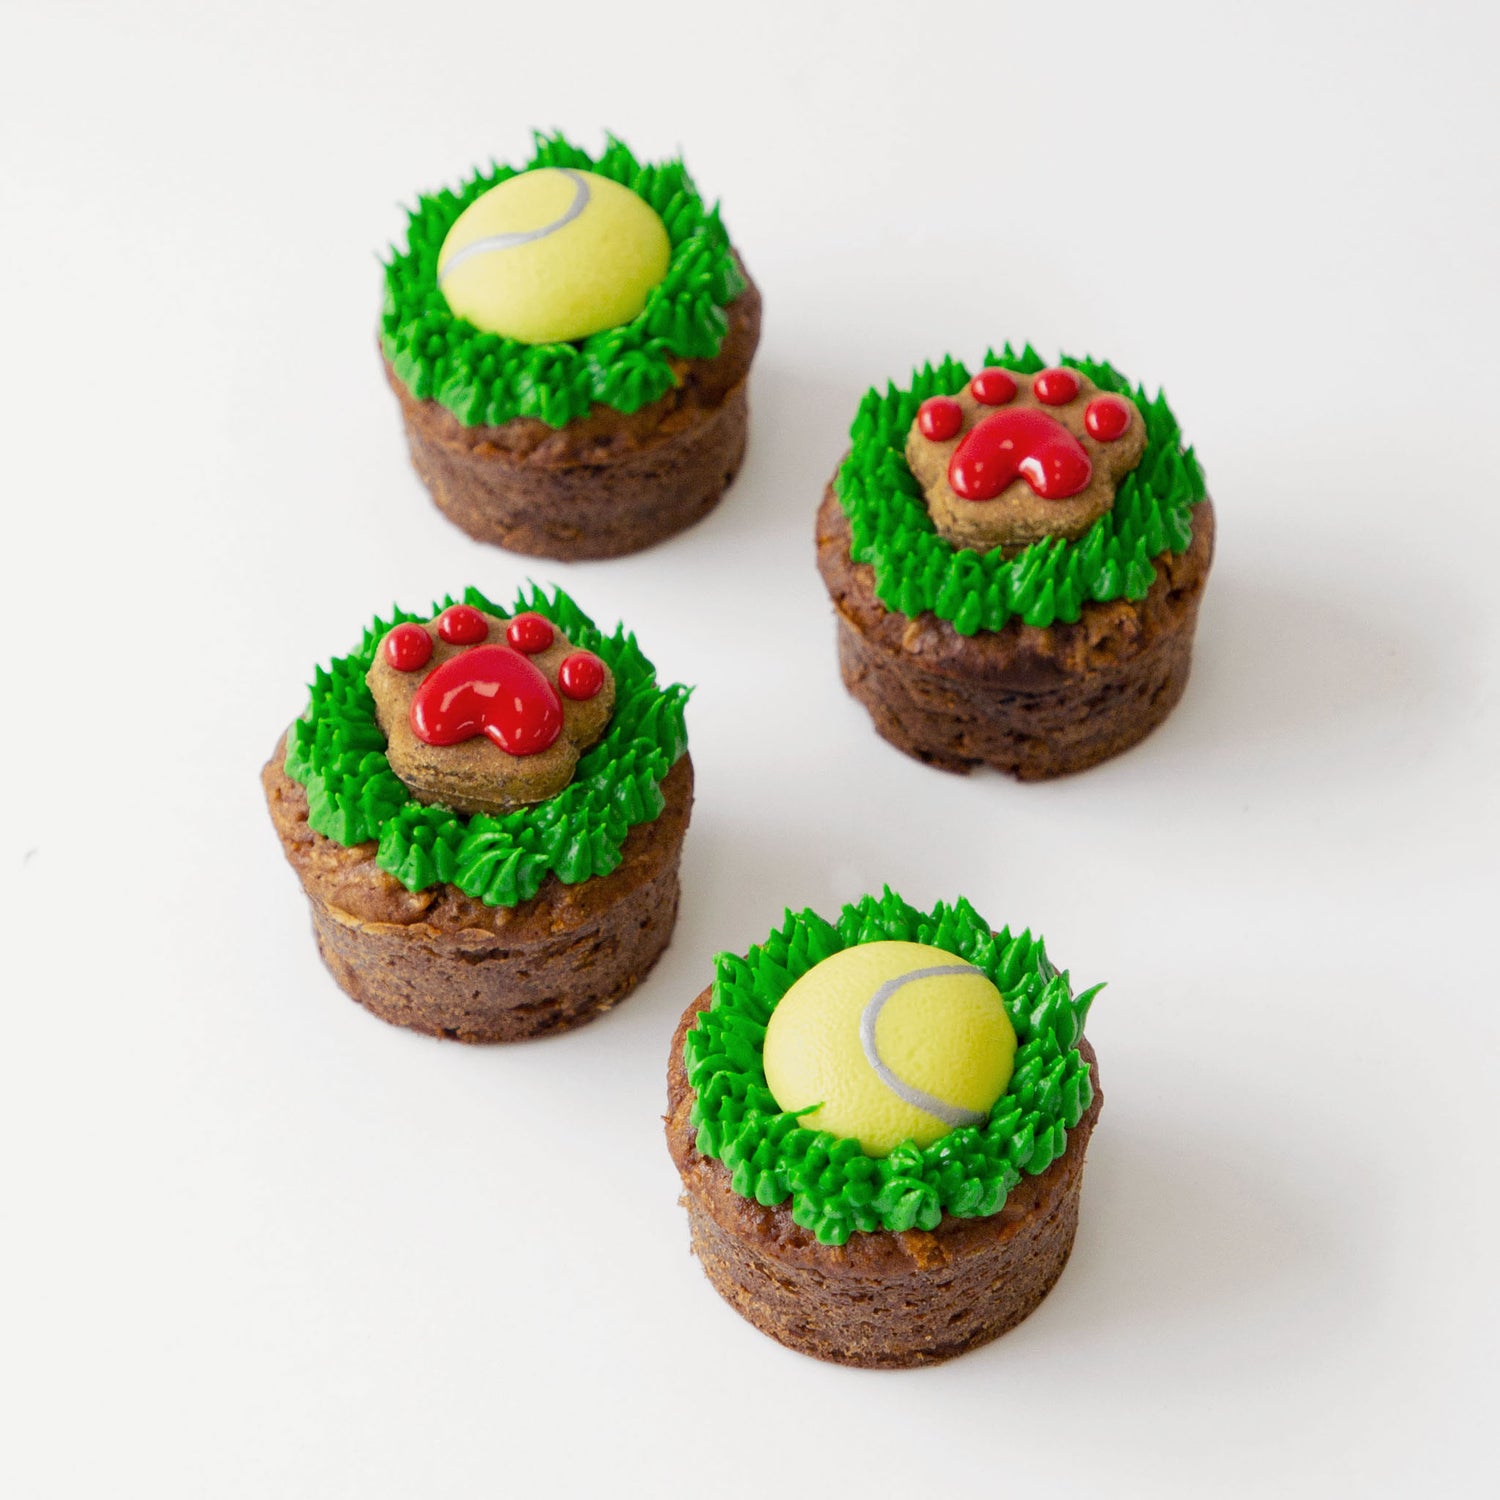 Tennis-Ball-Dog-Cupcakes-Pupcakes-Puppy-Cakes-Red